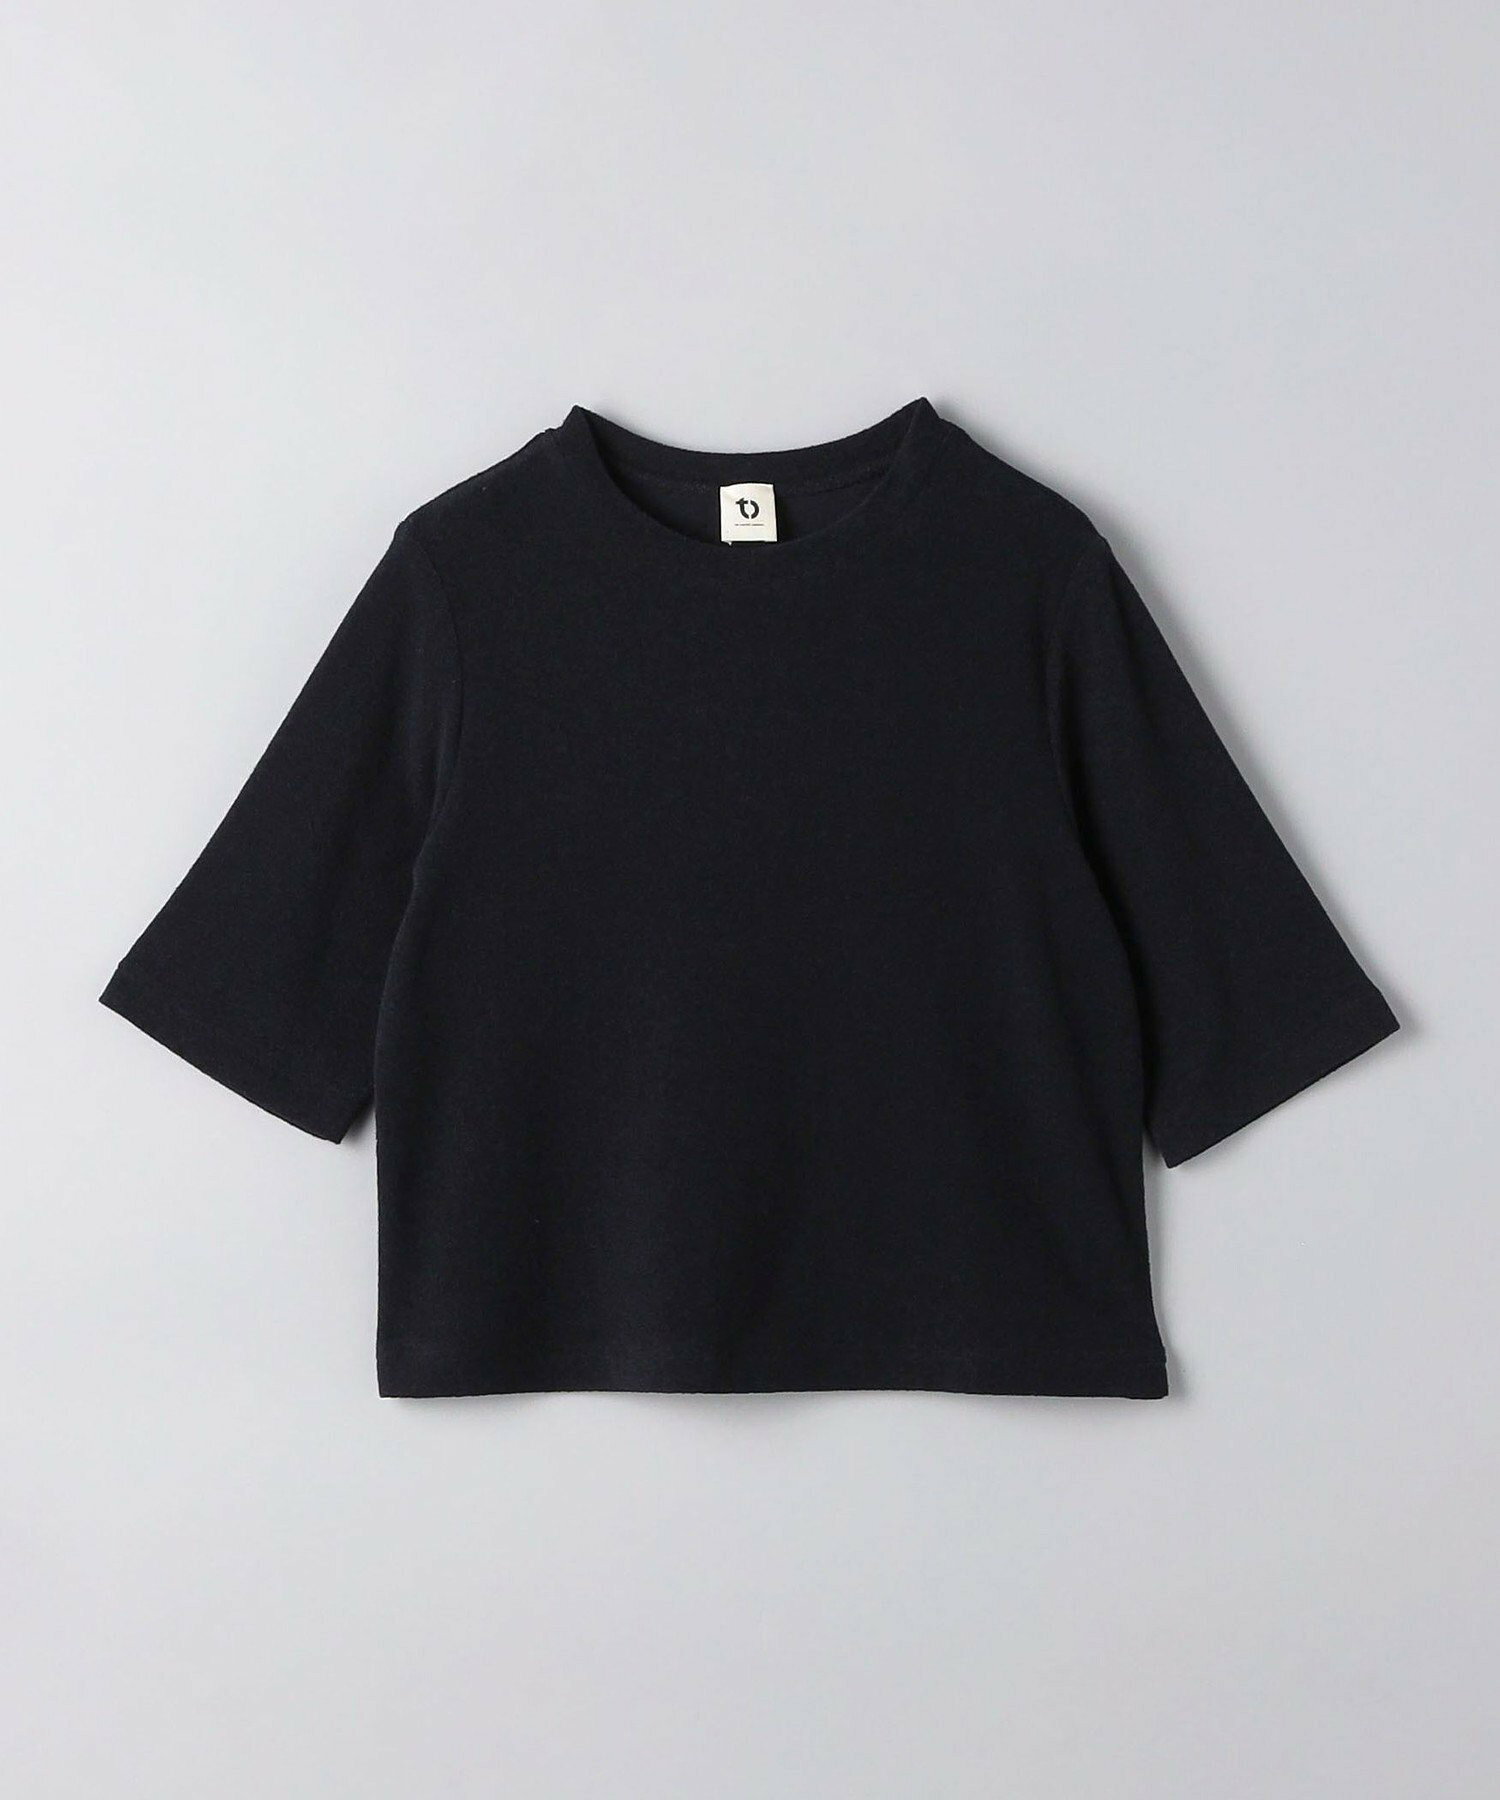 <TO UNITED ARROWS>パイル ショートスリーブ カットソー